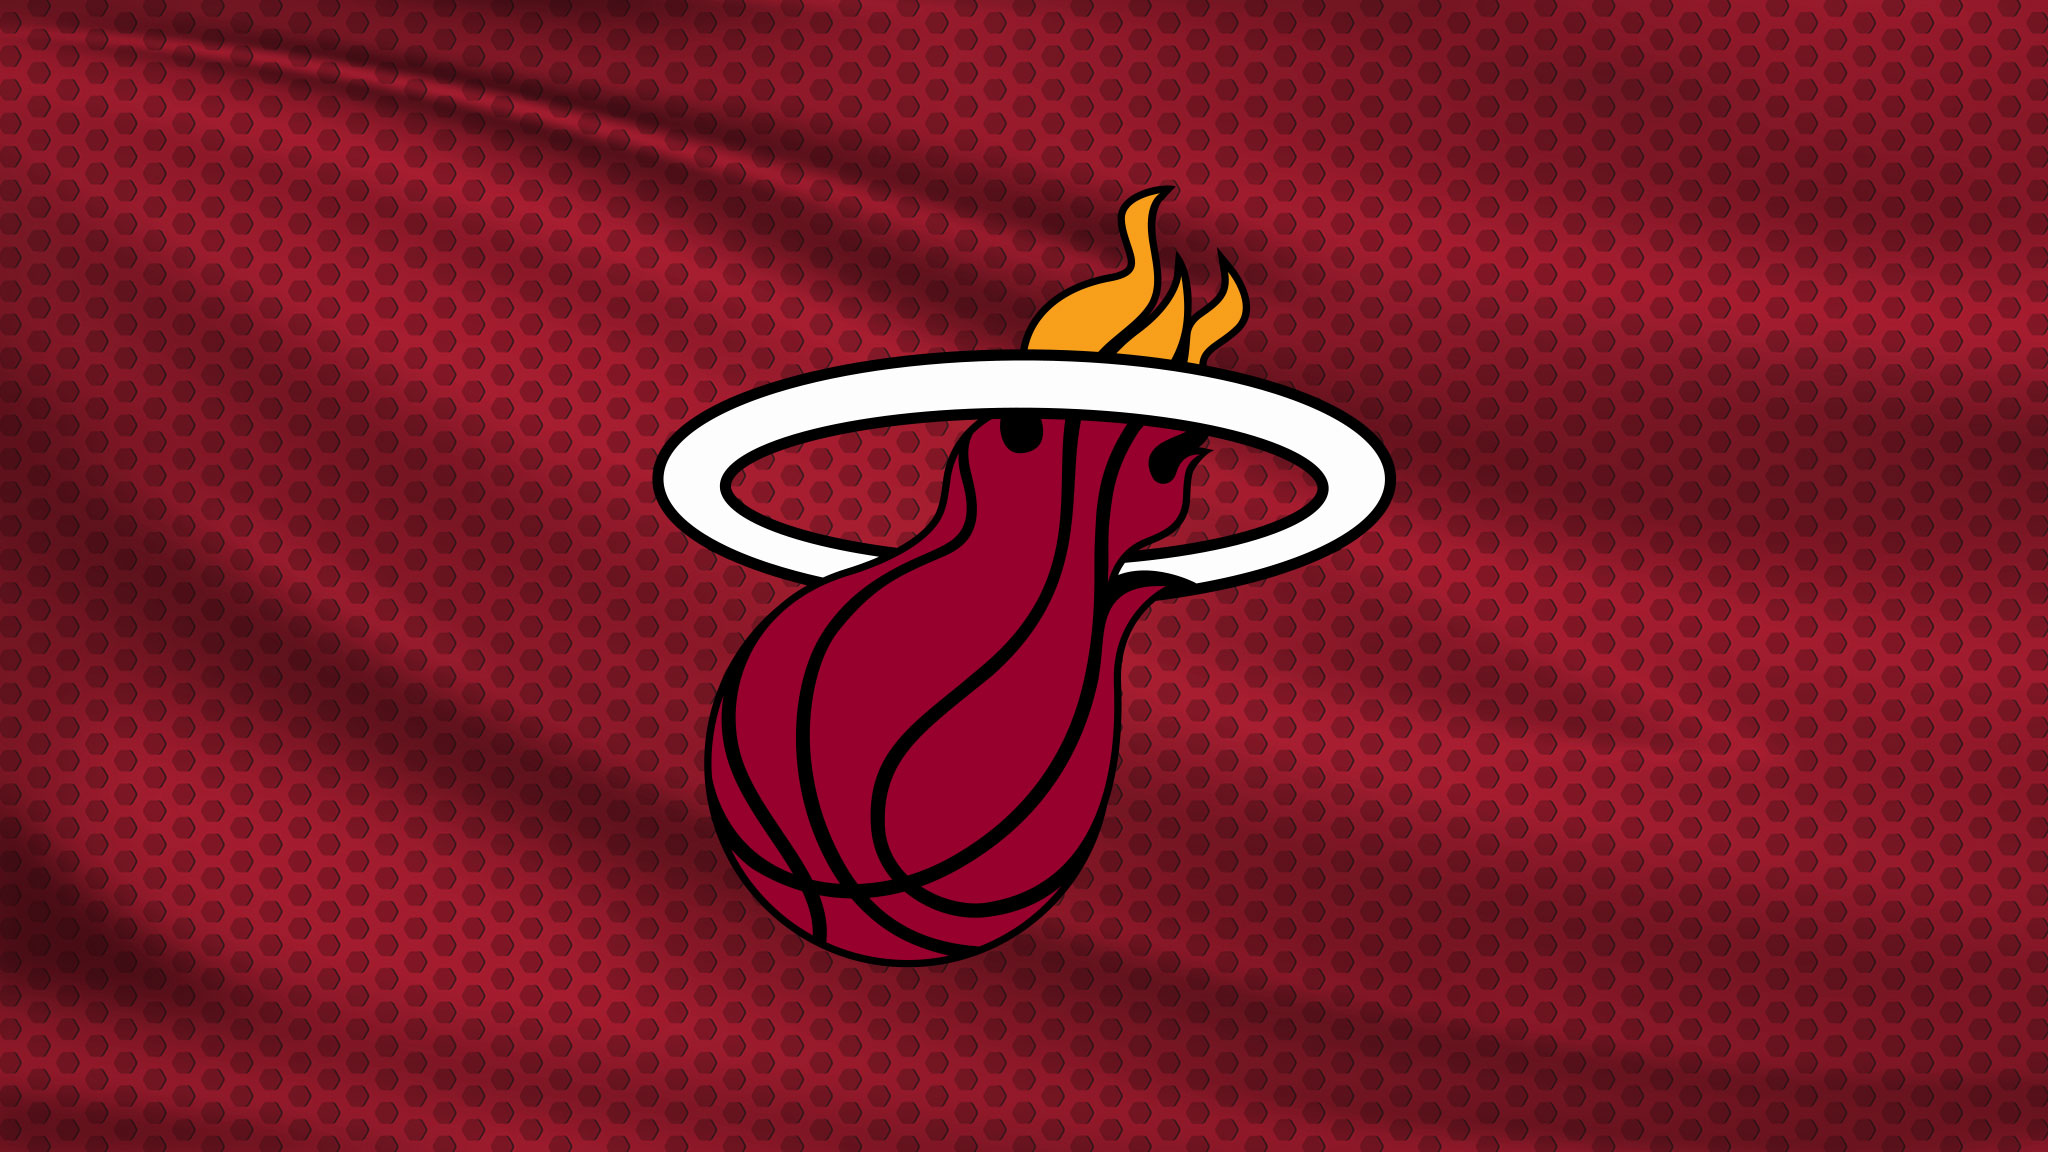 East Conf Semis: TBD at Heat: Rd 2 Home Game 1 (if necessary)